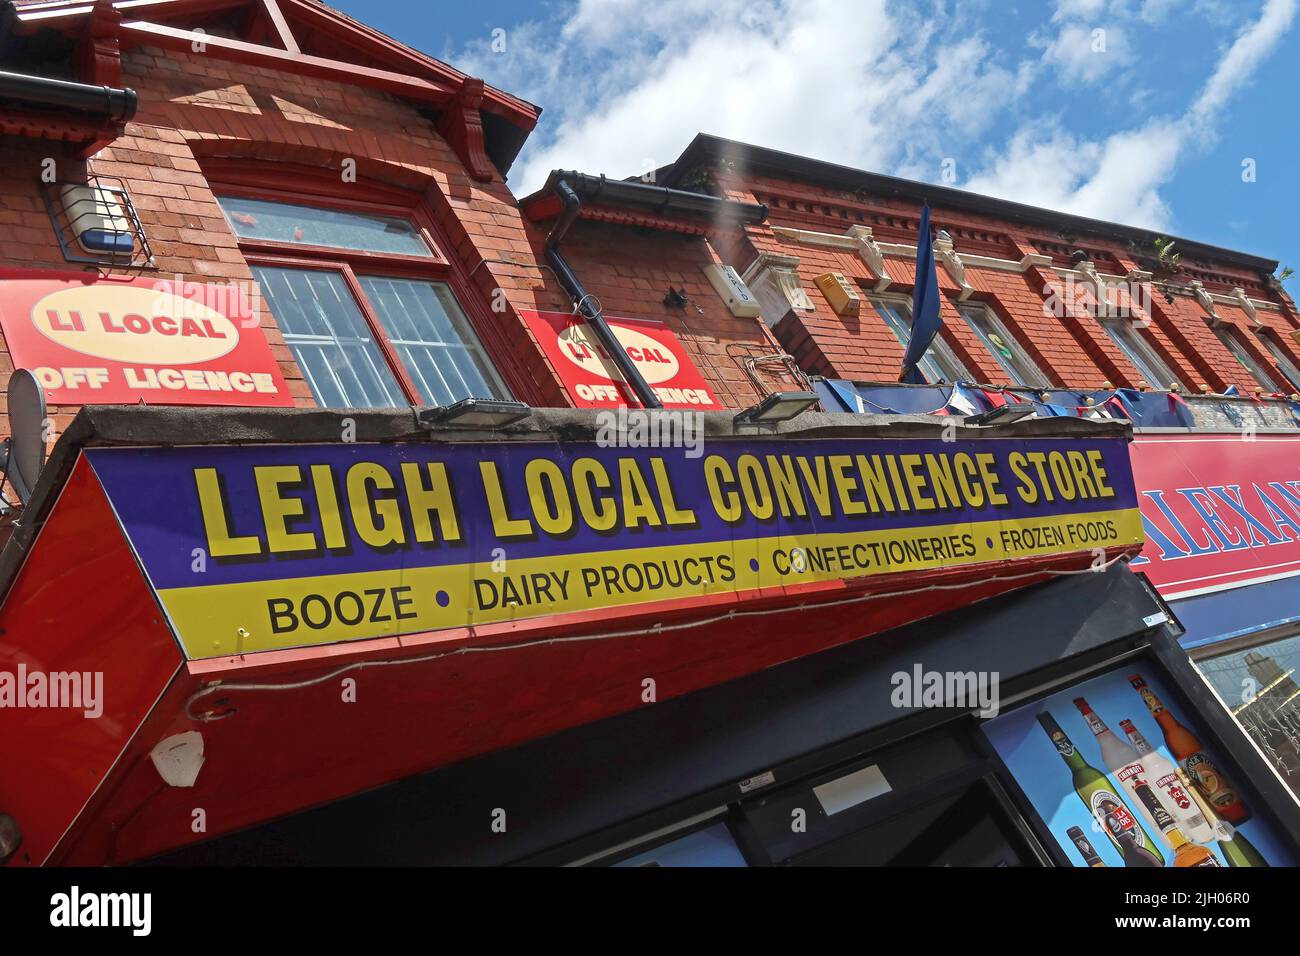 LI Local, Leigh Local Convenience Store, Booze, Diary Products, Confectioneries, Frozen Foods, 20 Railway Rd, Leigh, England, UK, WN7 4AX Stockfoto